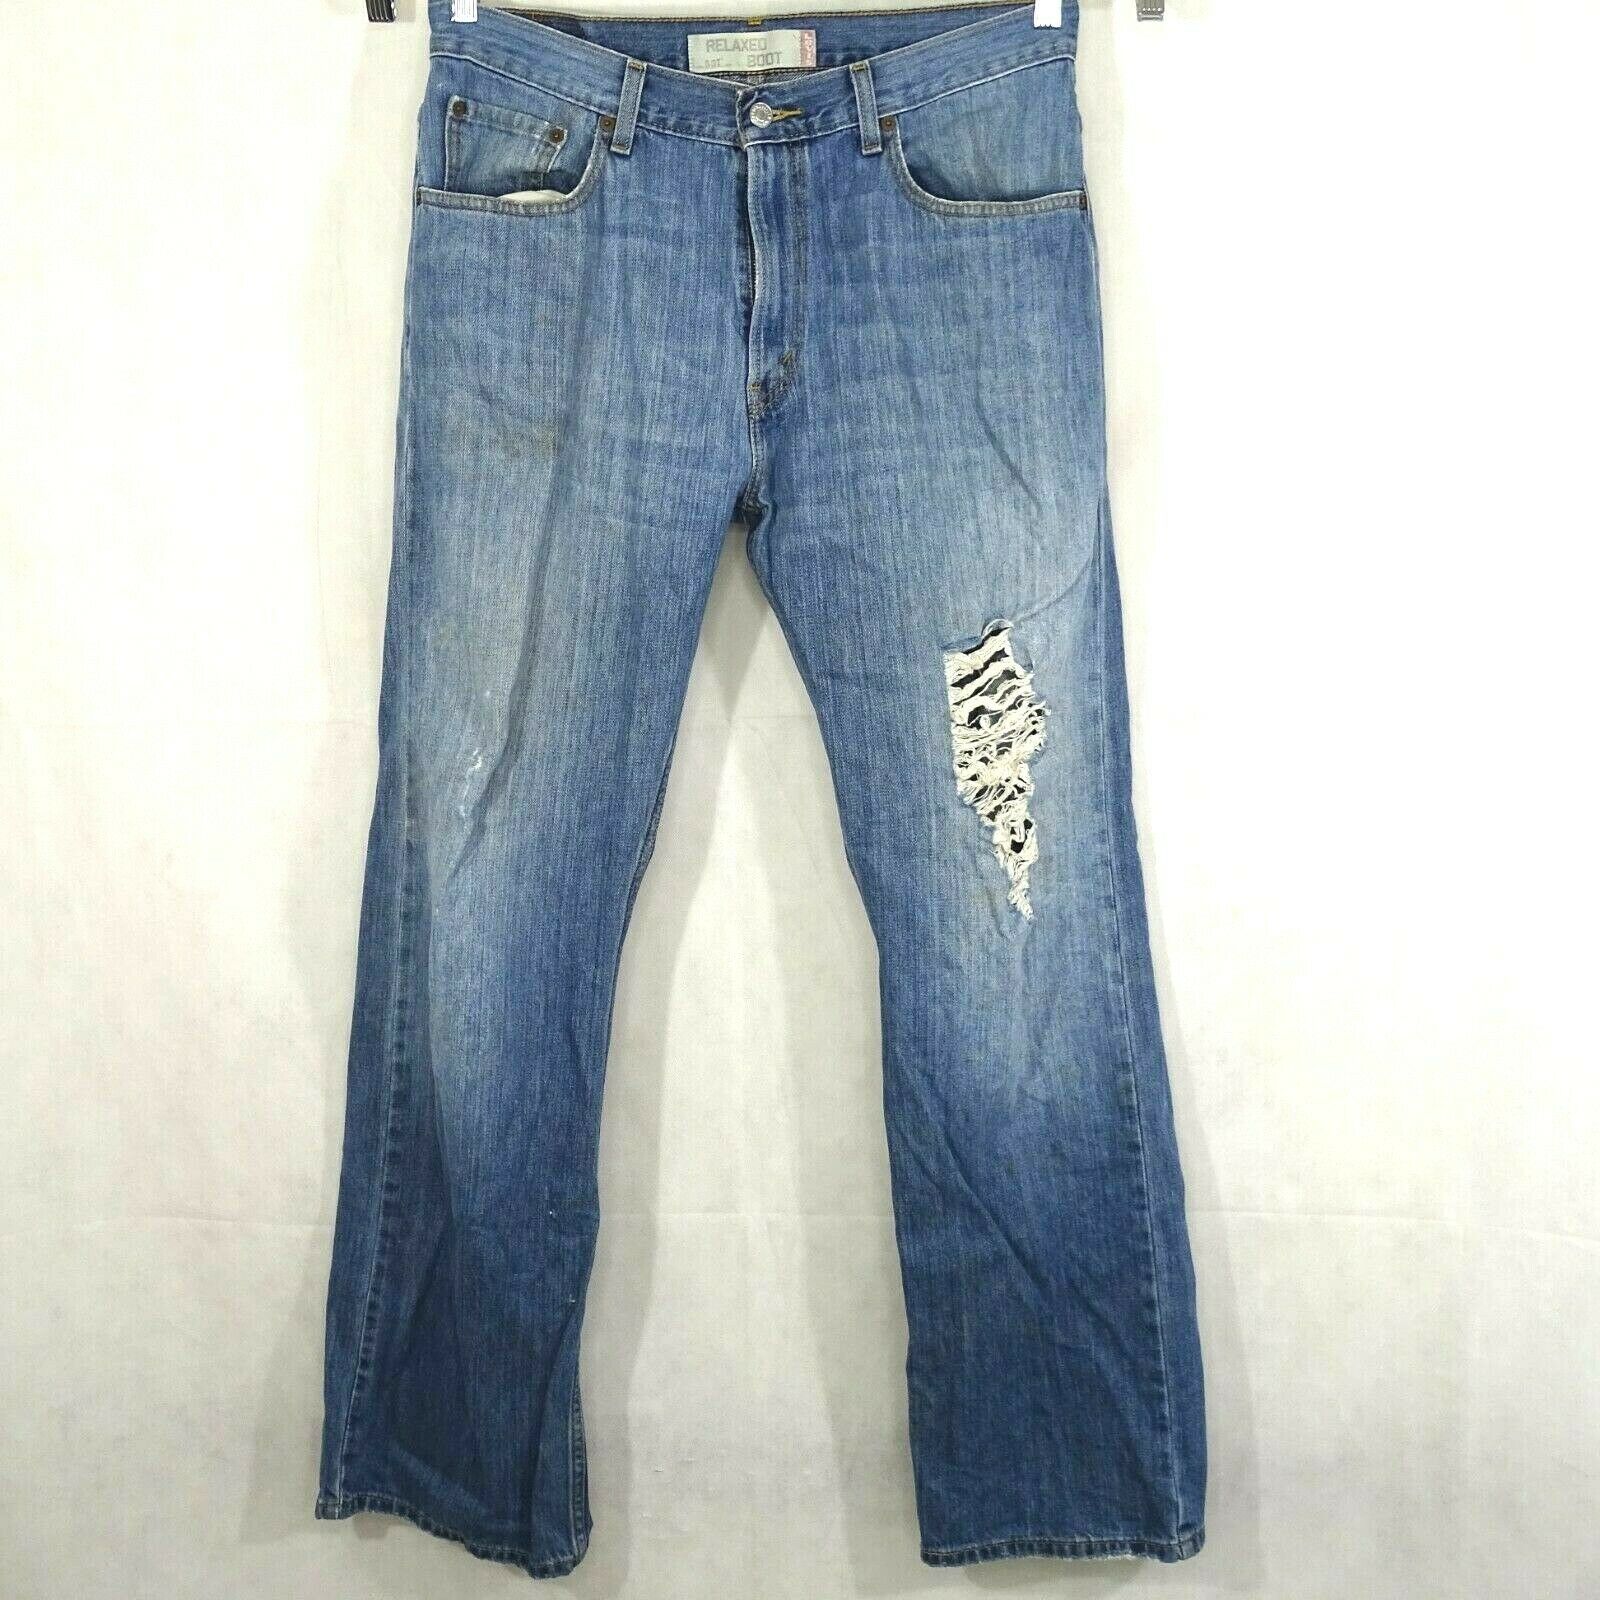 Levis 557 Relaxed Bootcut Jeans Ripped Men Size 34 x 34 Blue Medium ...